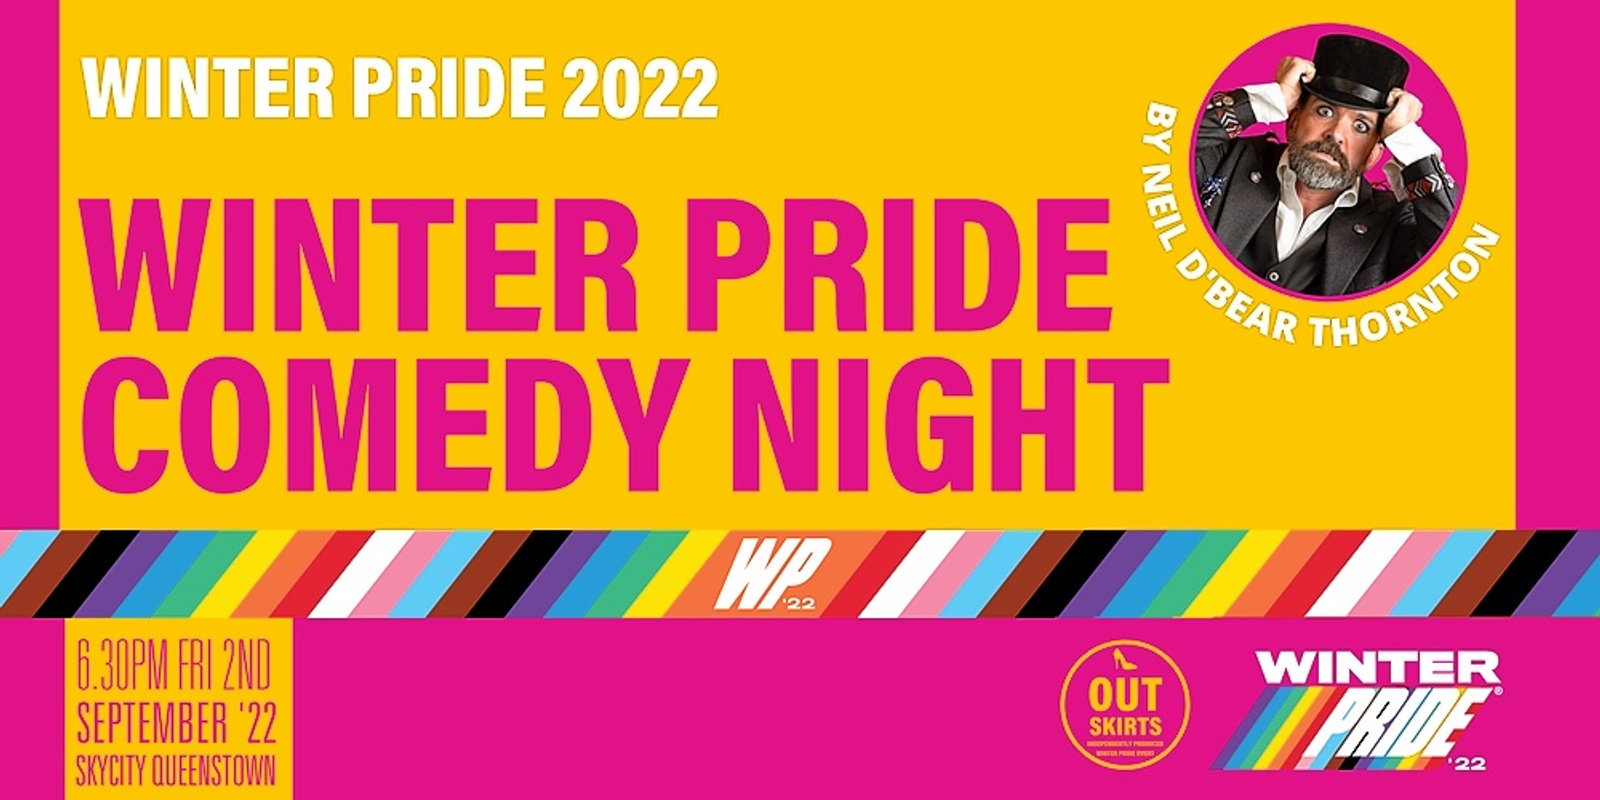 Banner image for Winter Pride Comedy Night WP '22